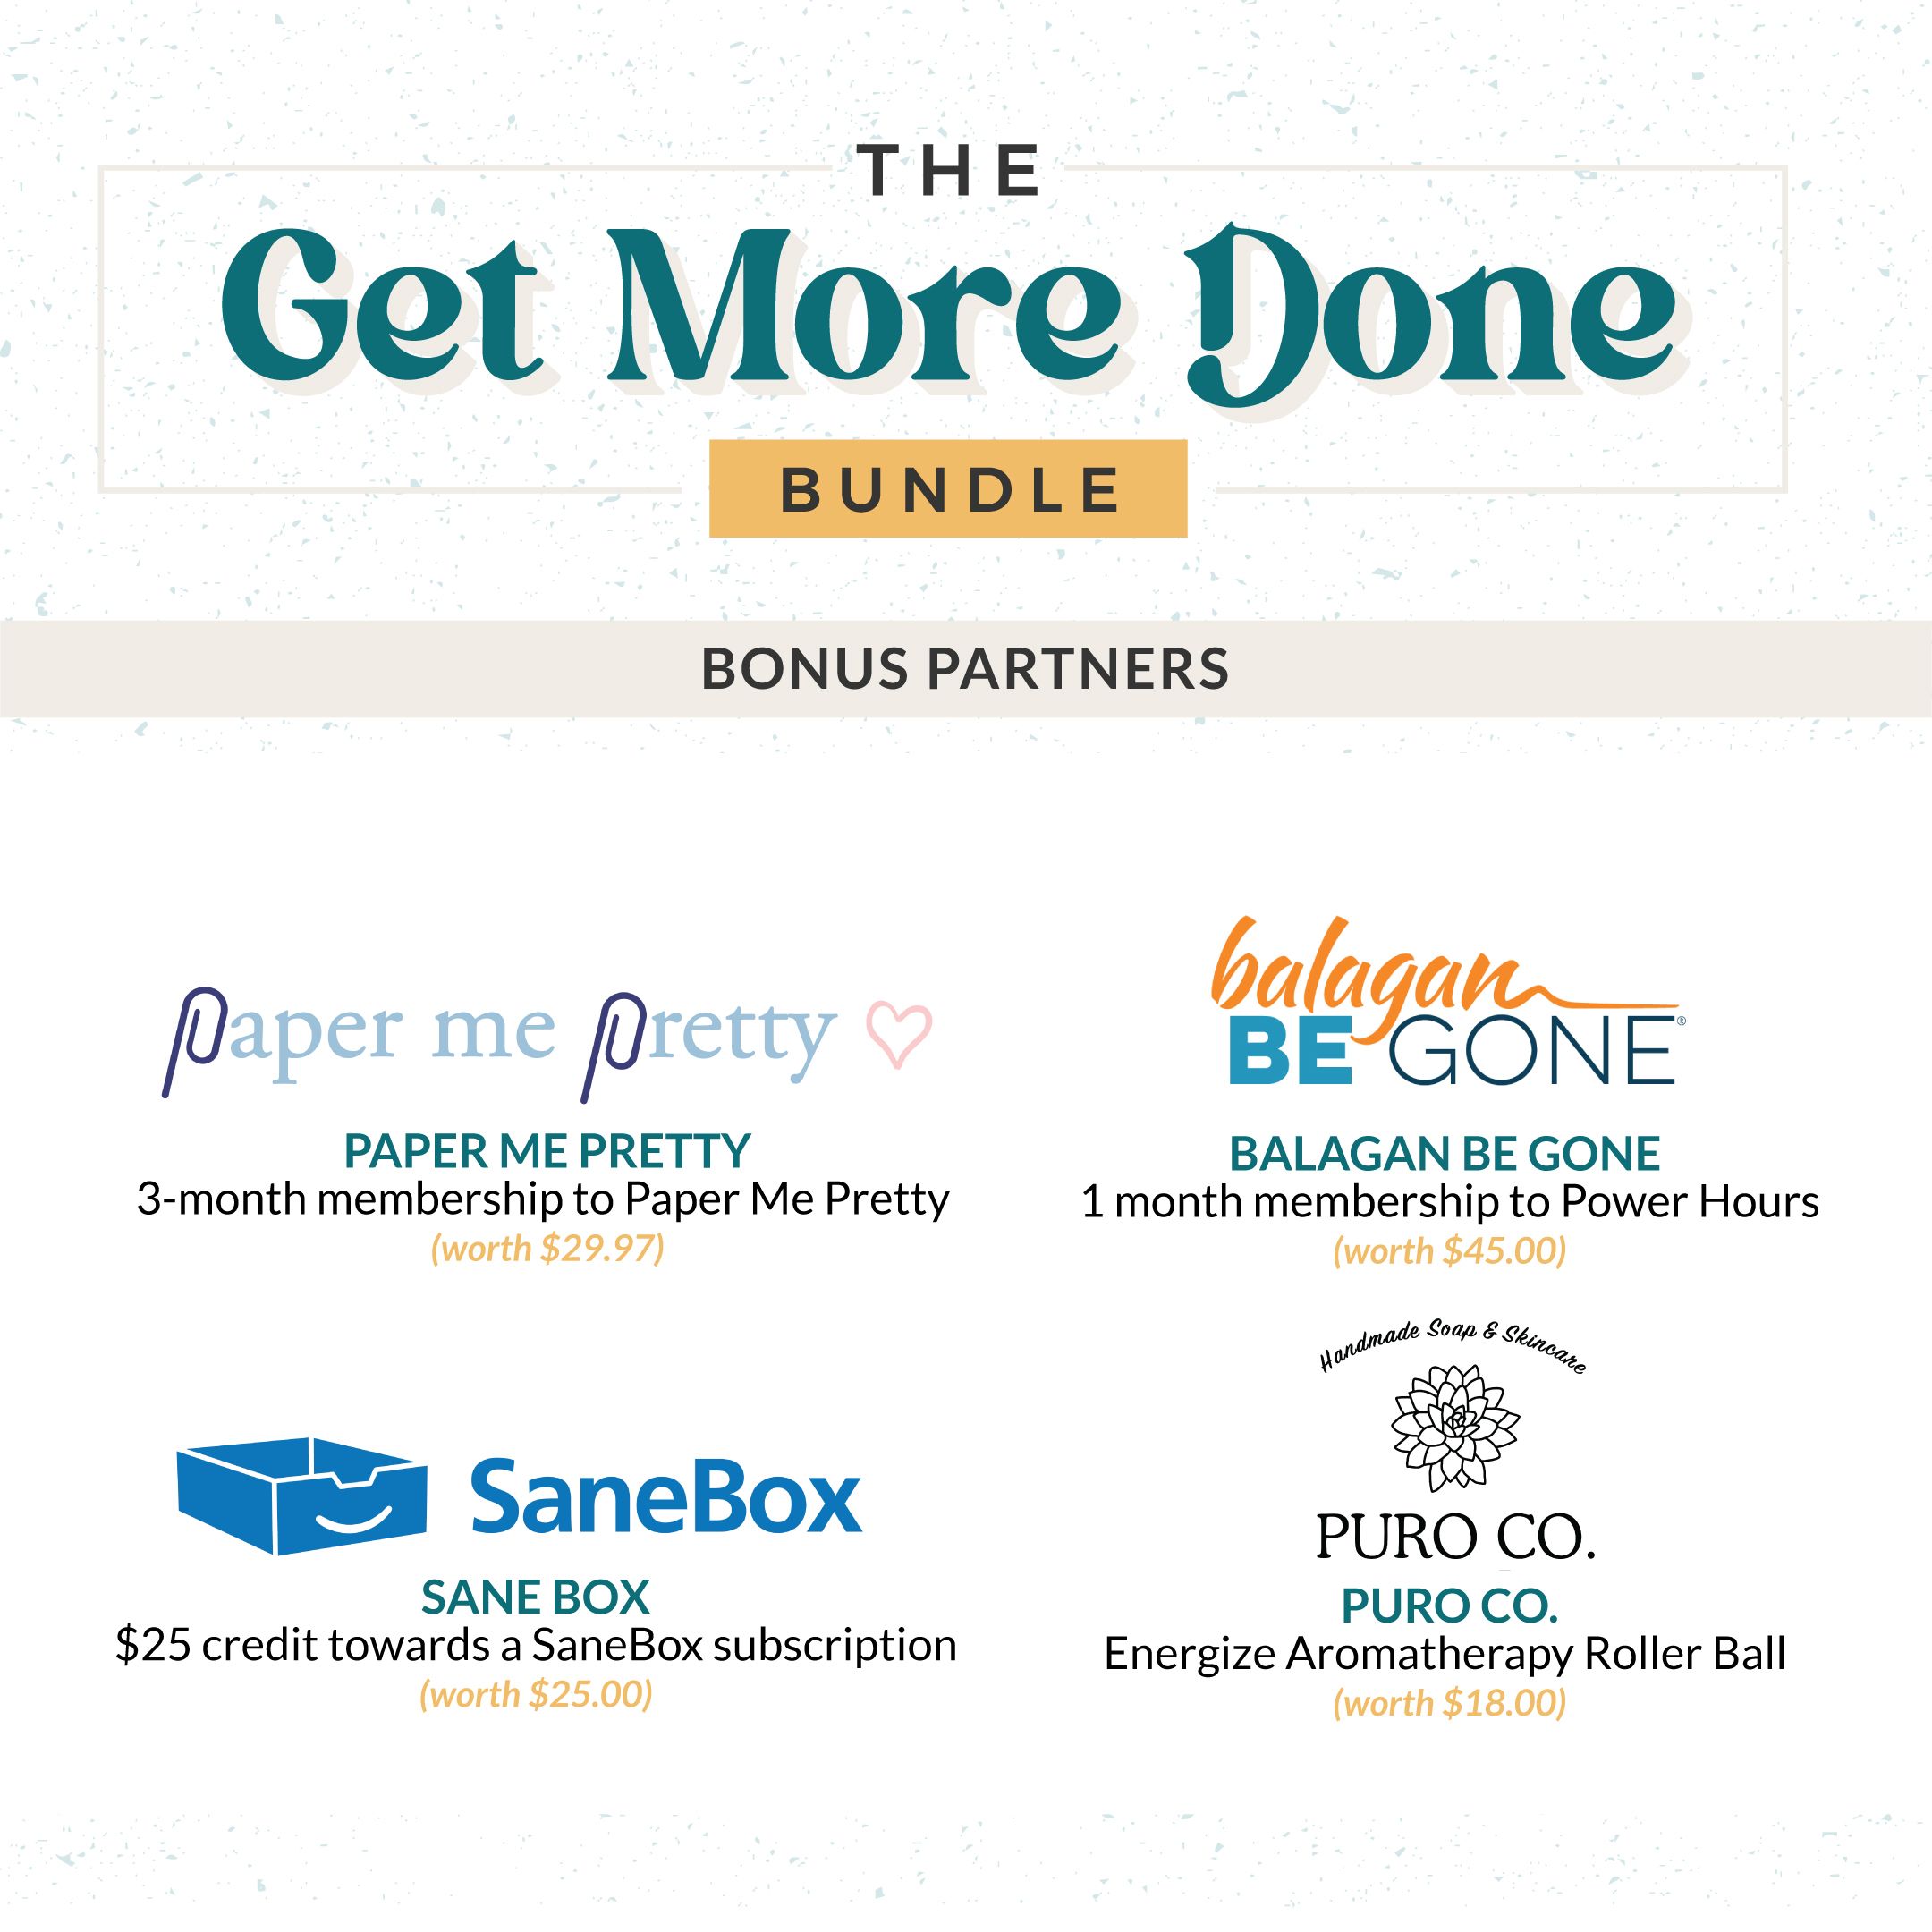 Bonuses with the super package of the Get More Done Bundle